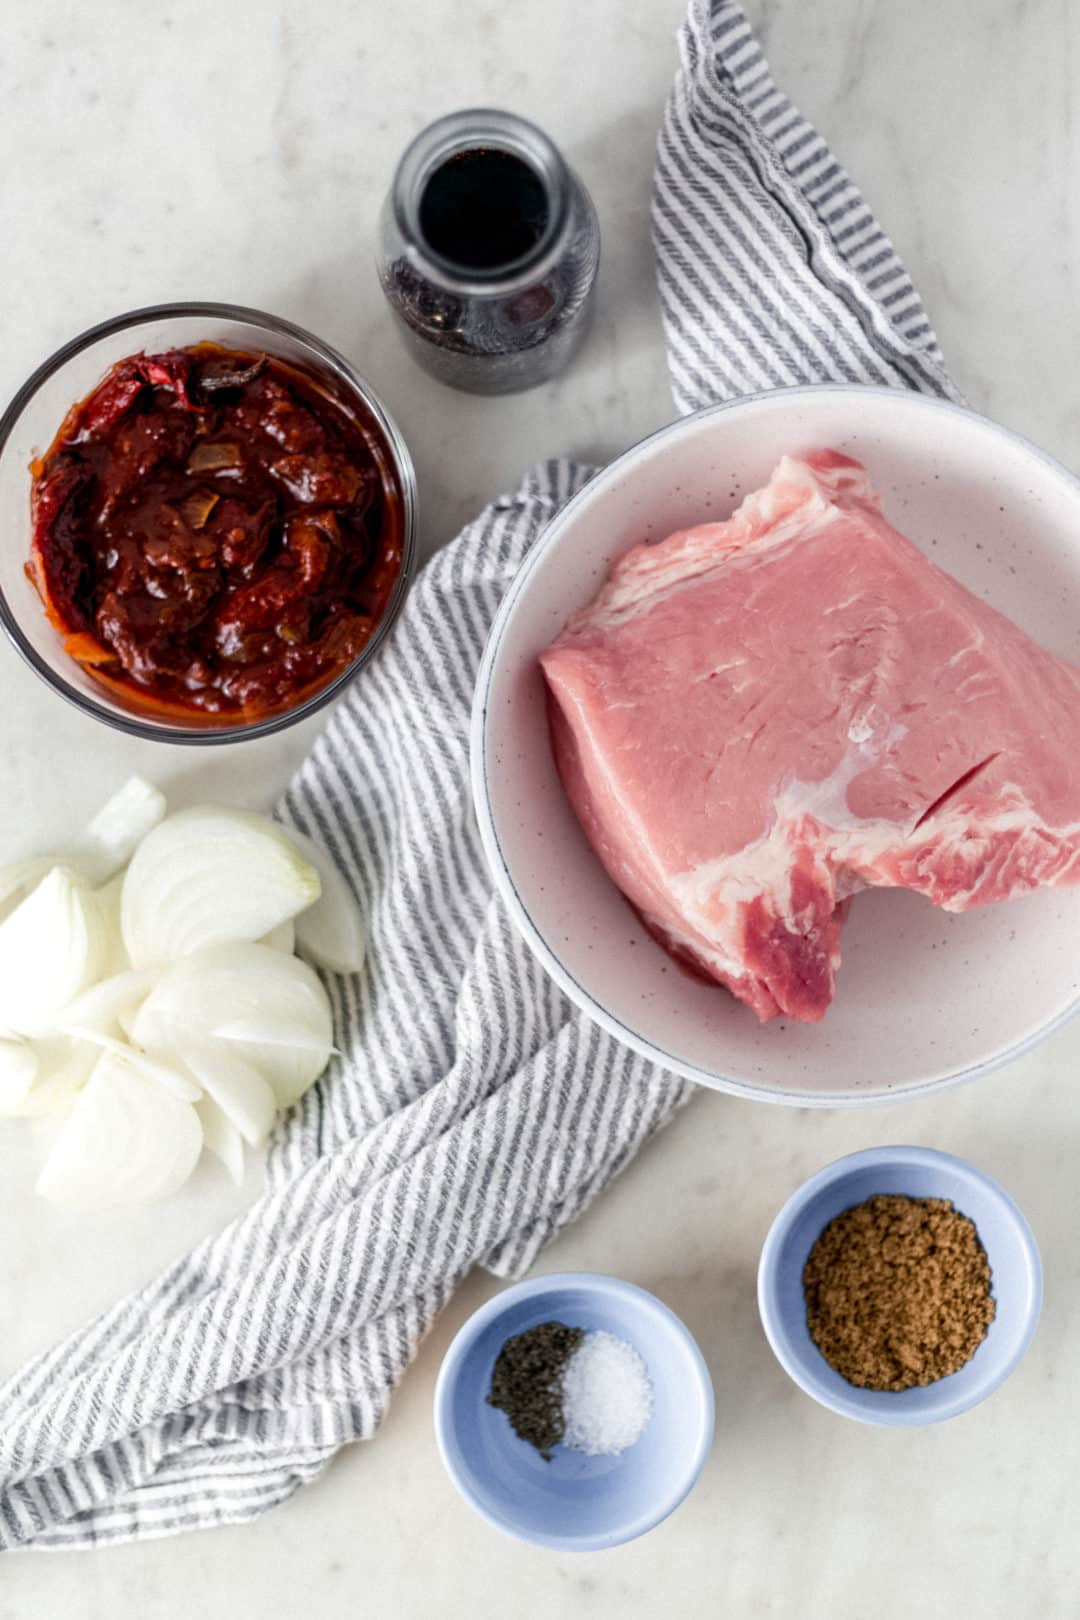 ingredients needed to make pulled pork in separate bowls and containers with a cloth napkin